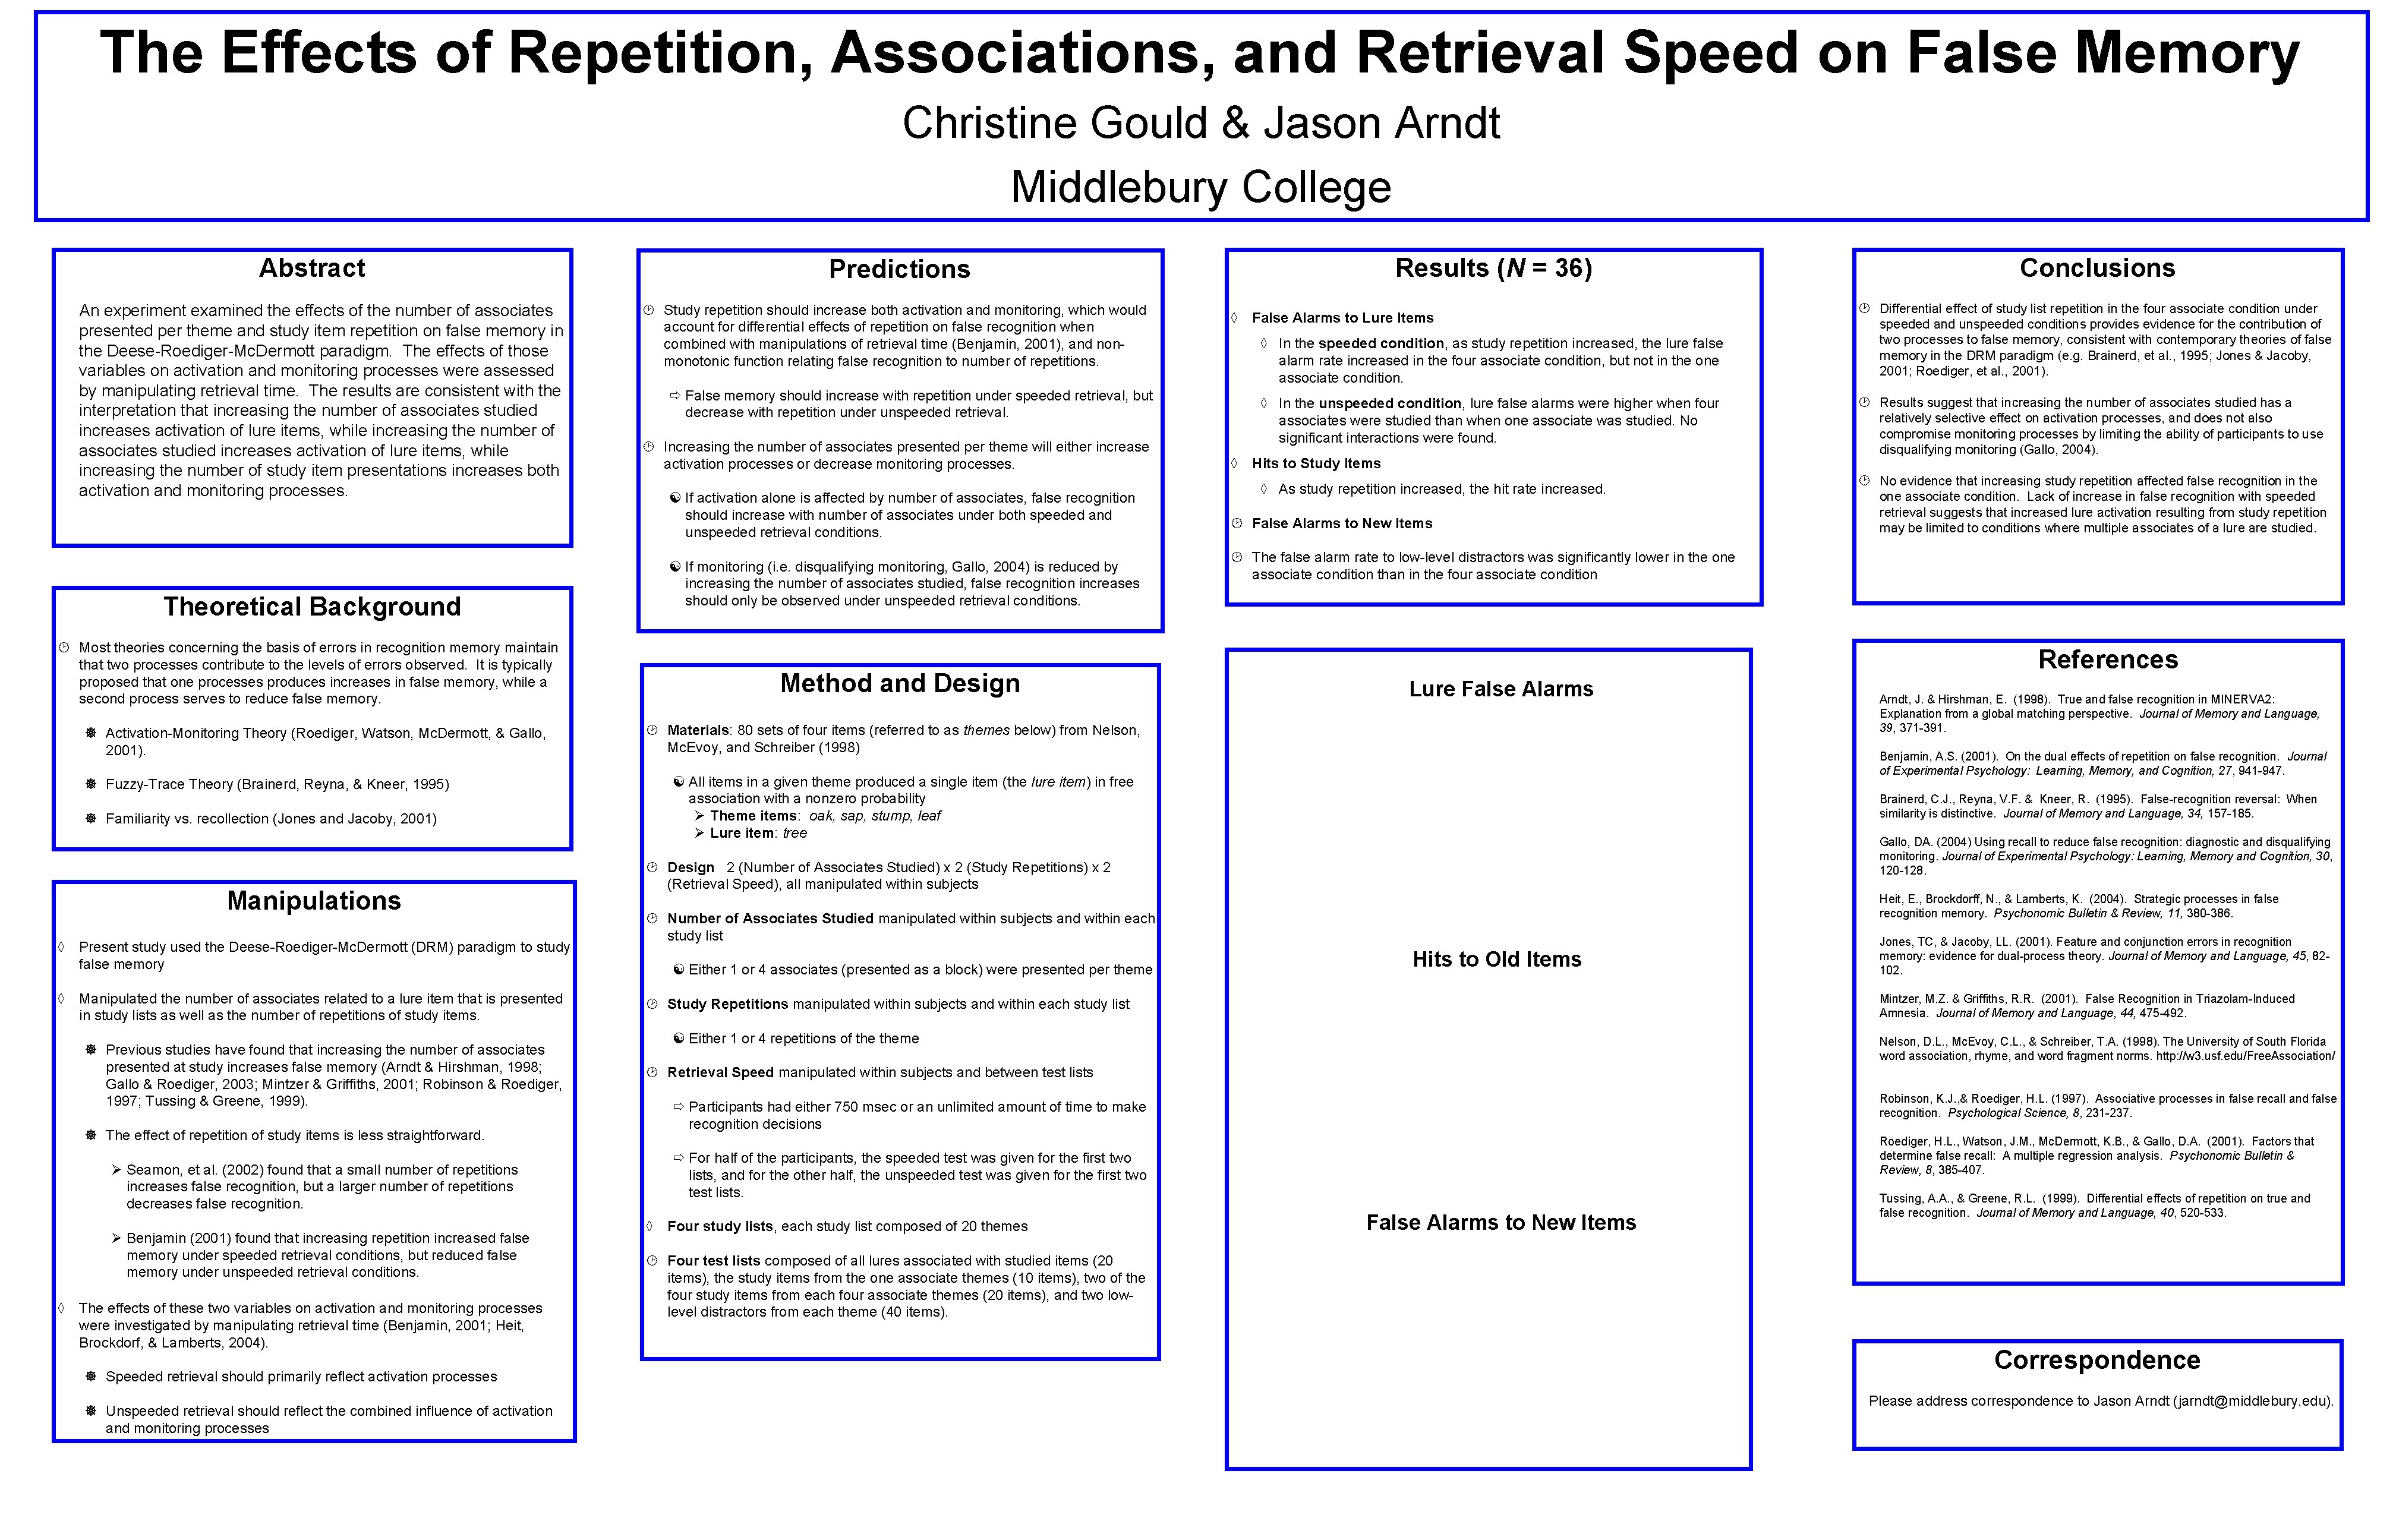 The Effects of Repetition, Associations, and Retrieval Speed on False Memory Christine Gould &